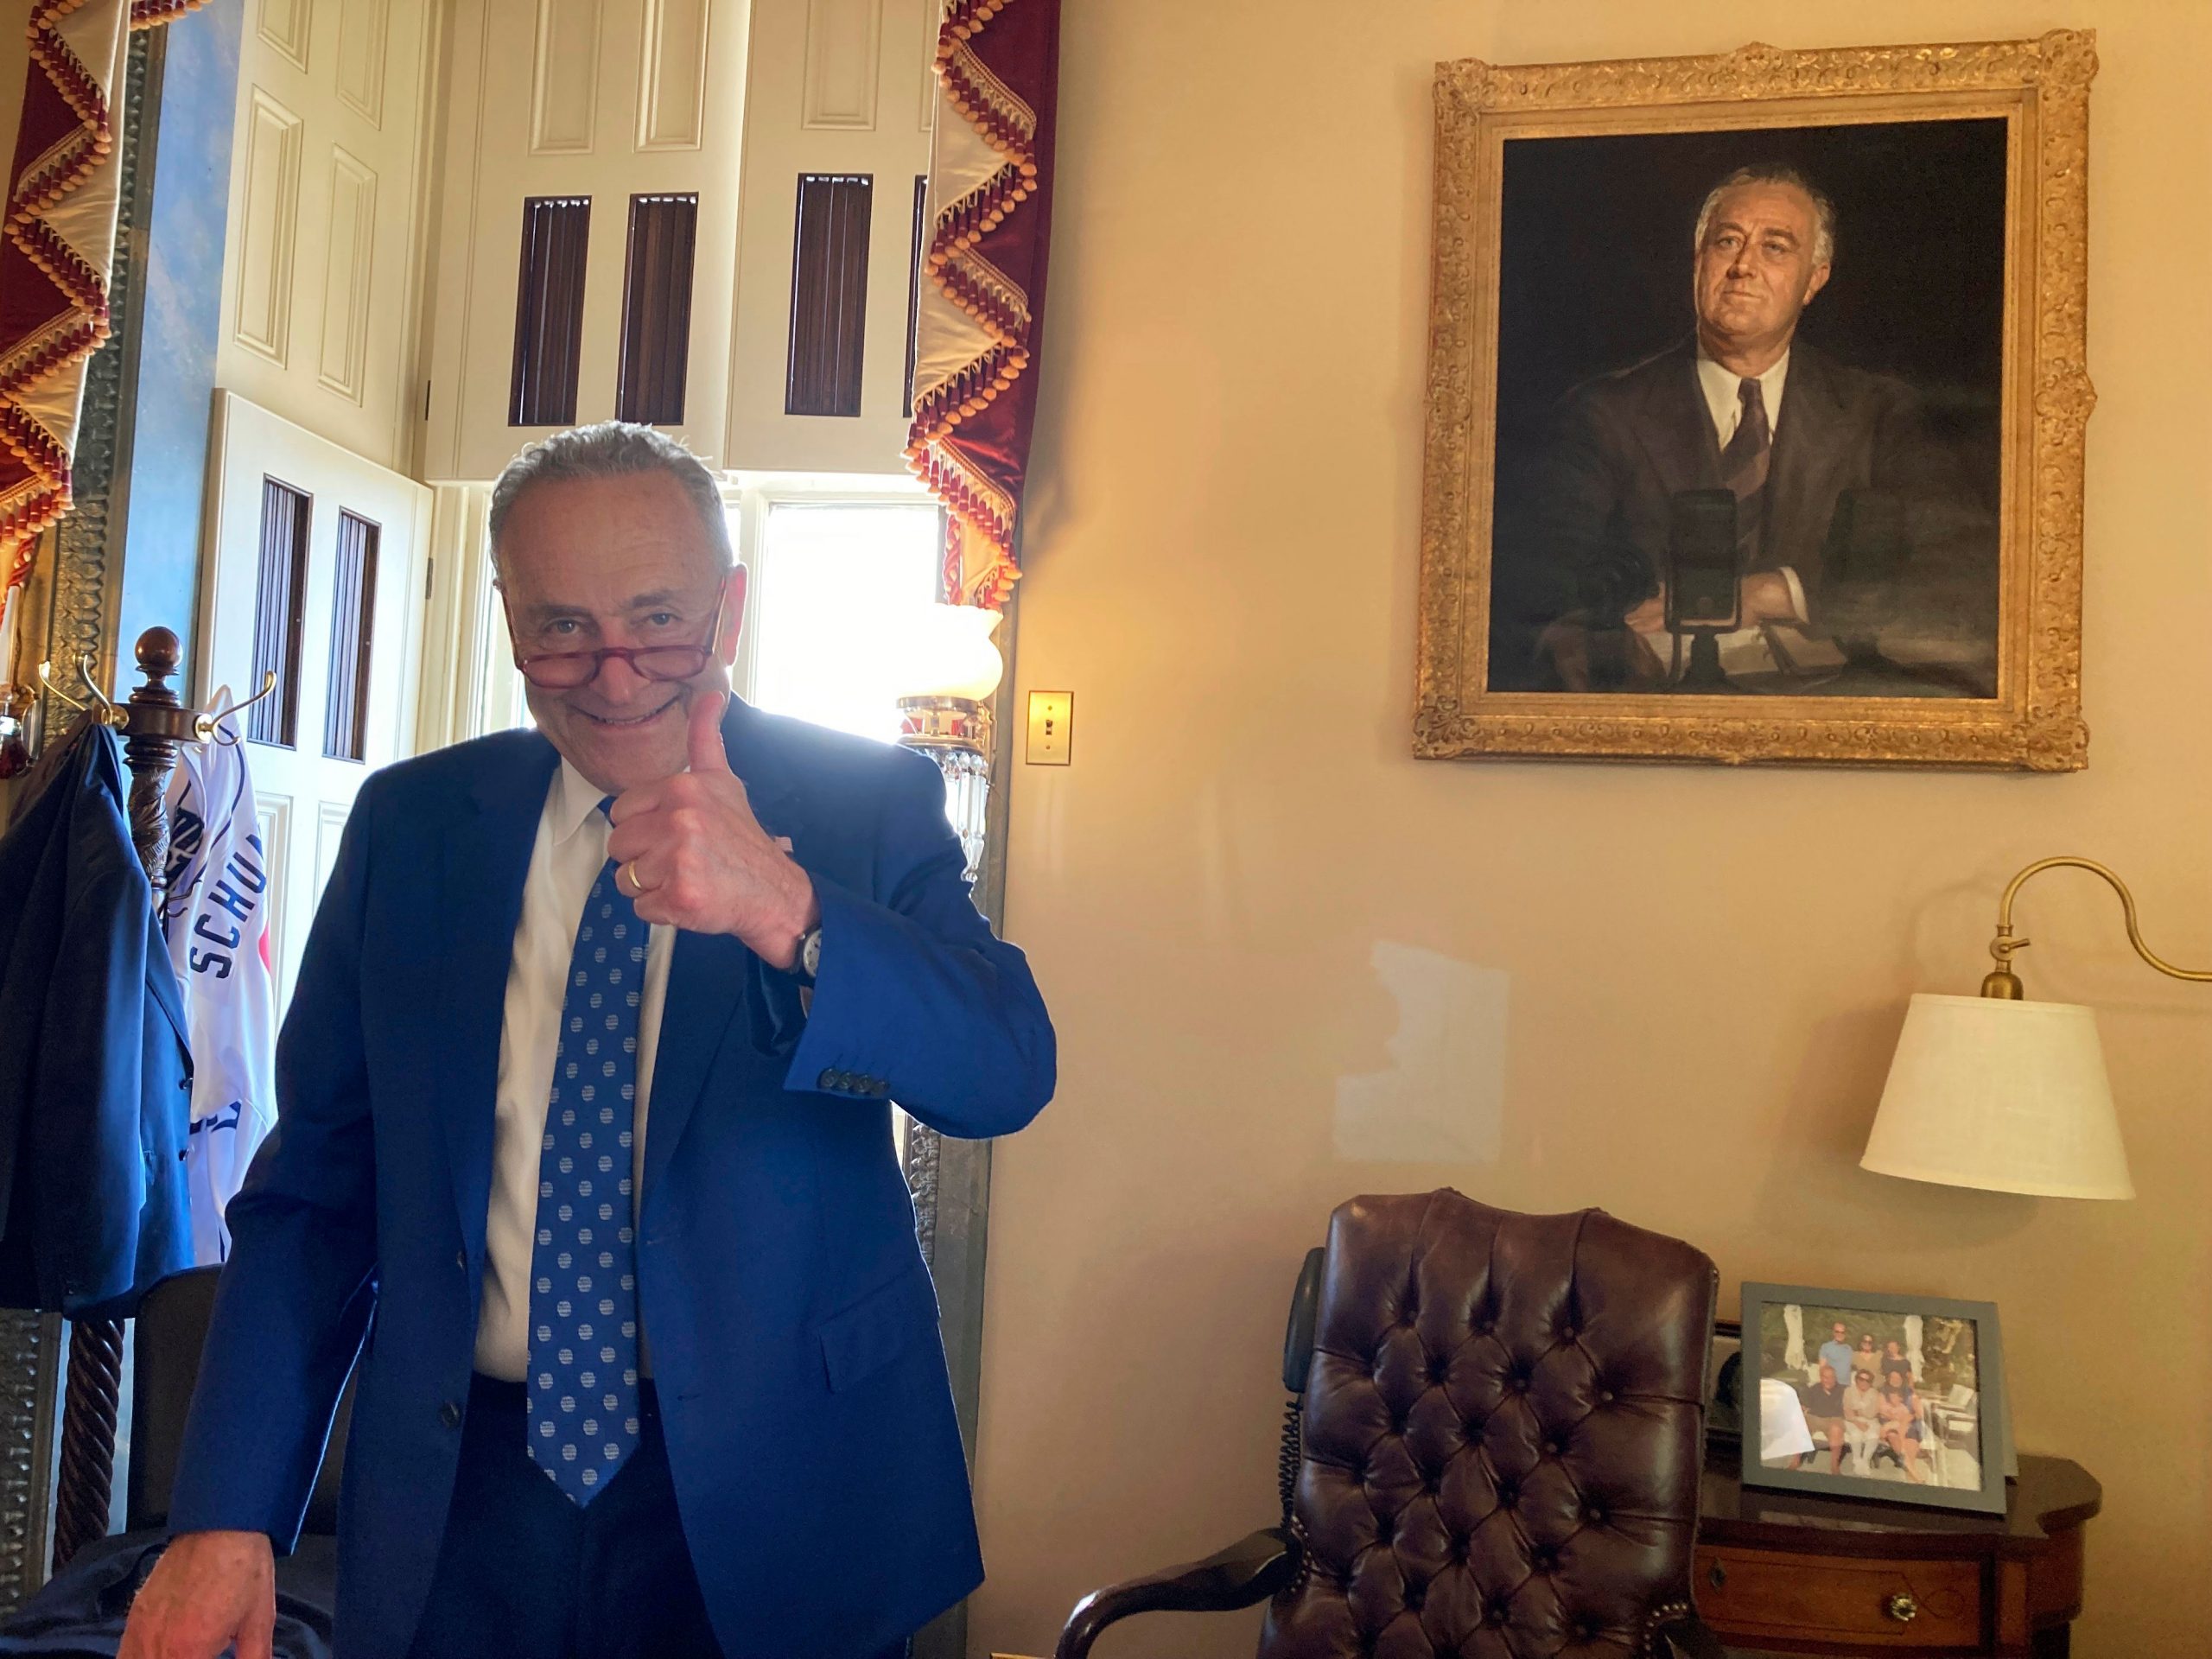 Who is Chuck Schumer?